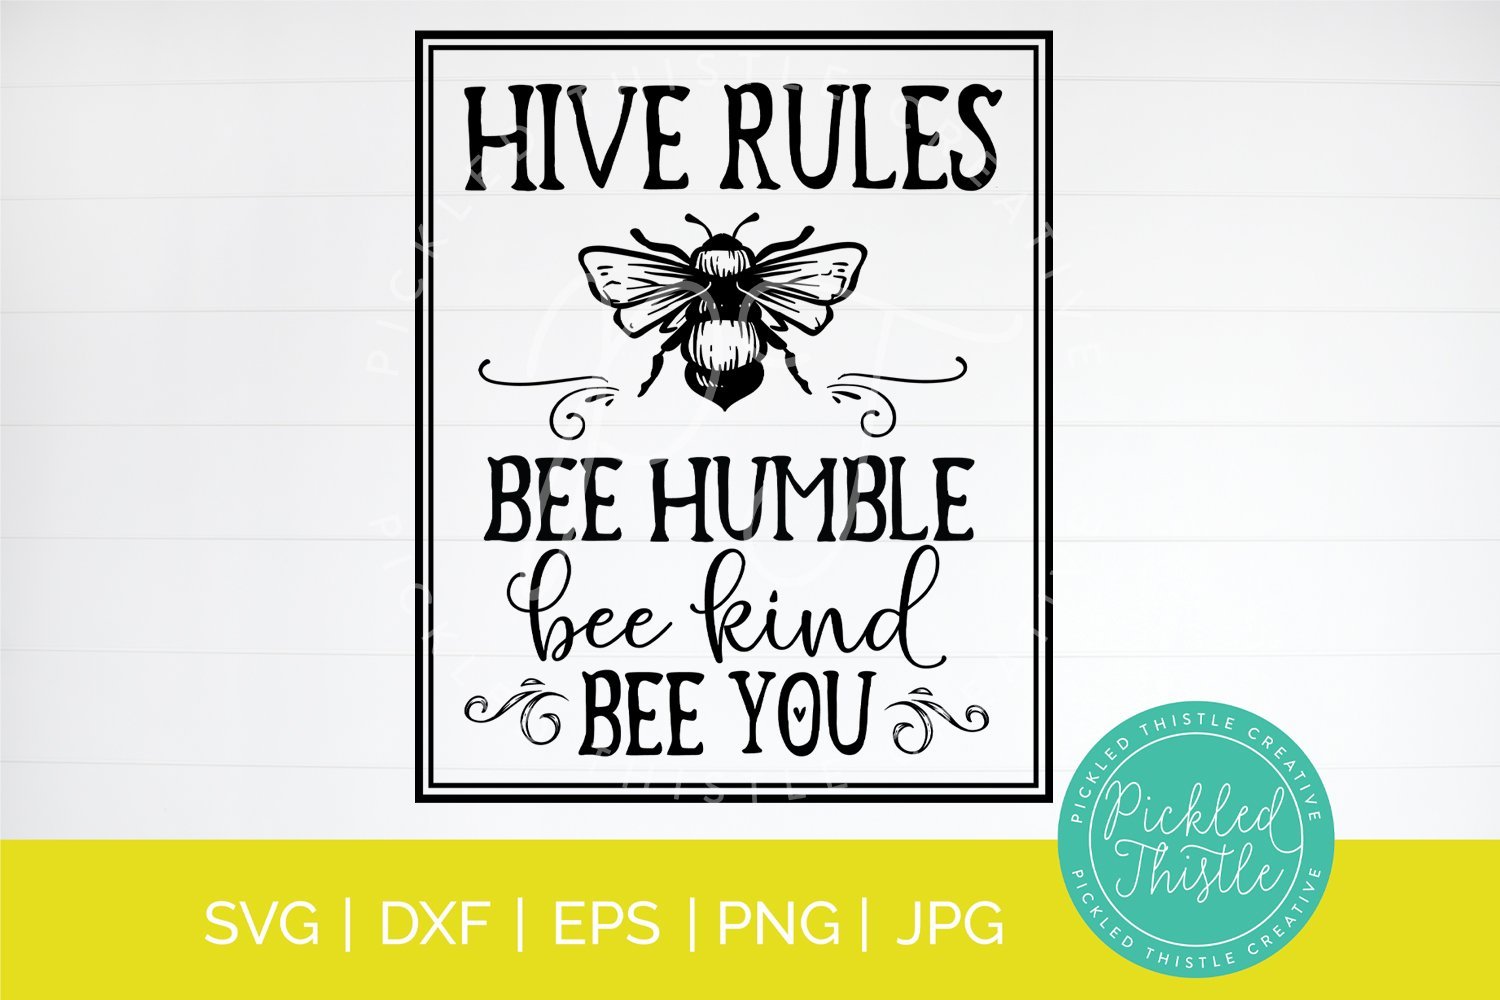 Download Family Rules Svg Hive Rules Bee Humble Bee Kind Bee You So Fontsy